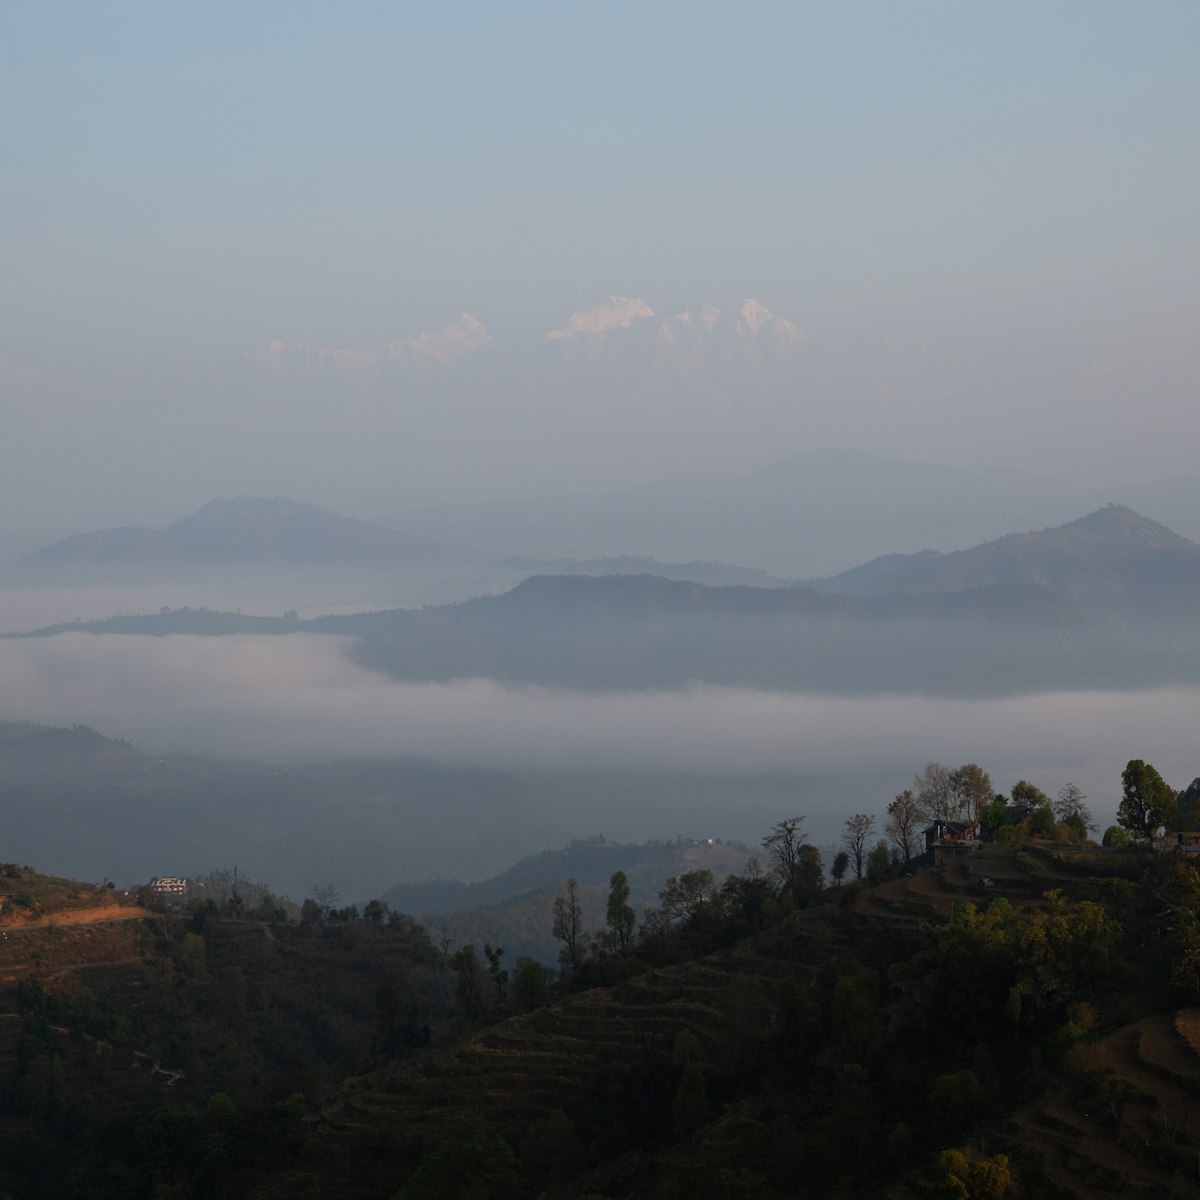 Views of the Himalayas at dawn from The Thani Mai Temple Viewpoint in Bandipur.